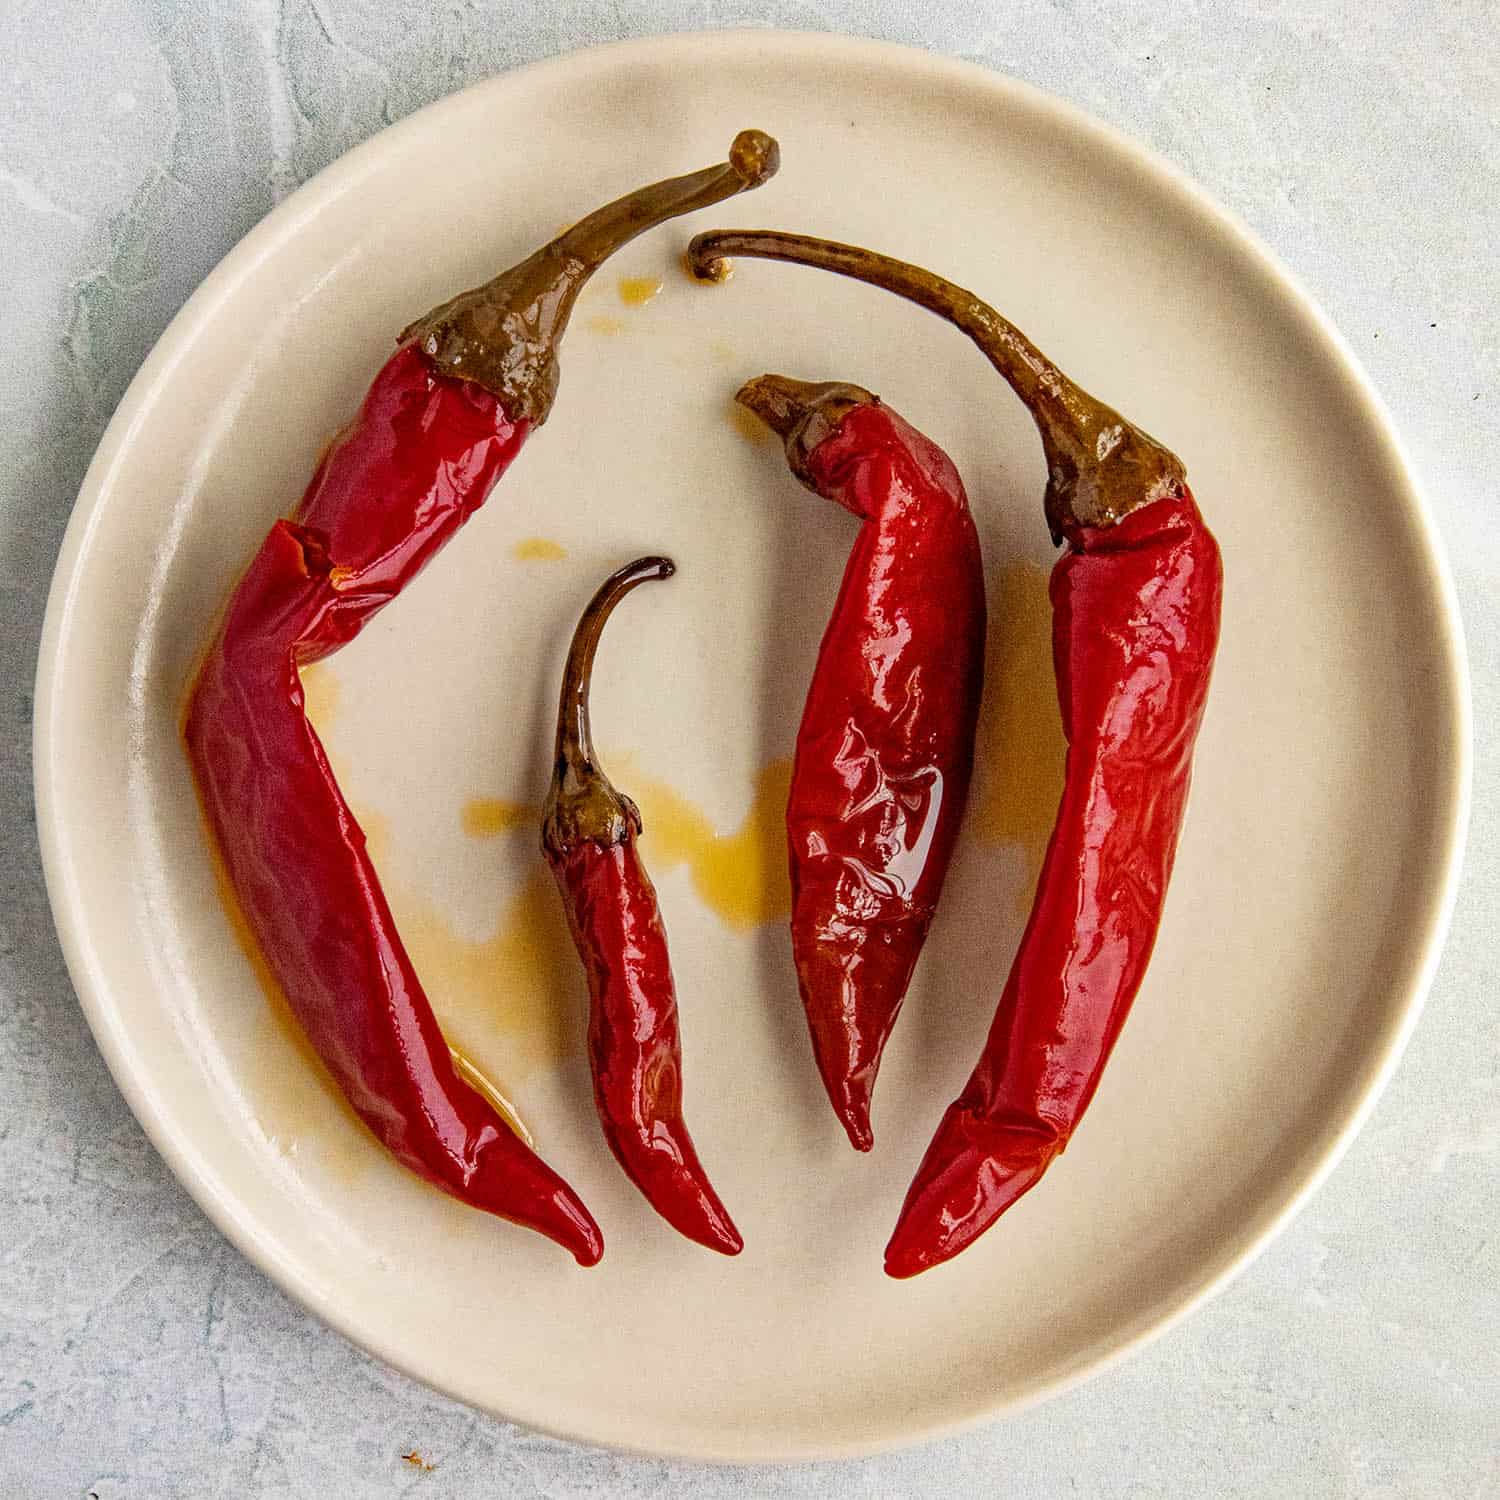 https://www.chilipeppermadness.com/wp-content/uploads/2020/09/Calabrian-Peppers-SQ.jpg